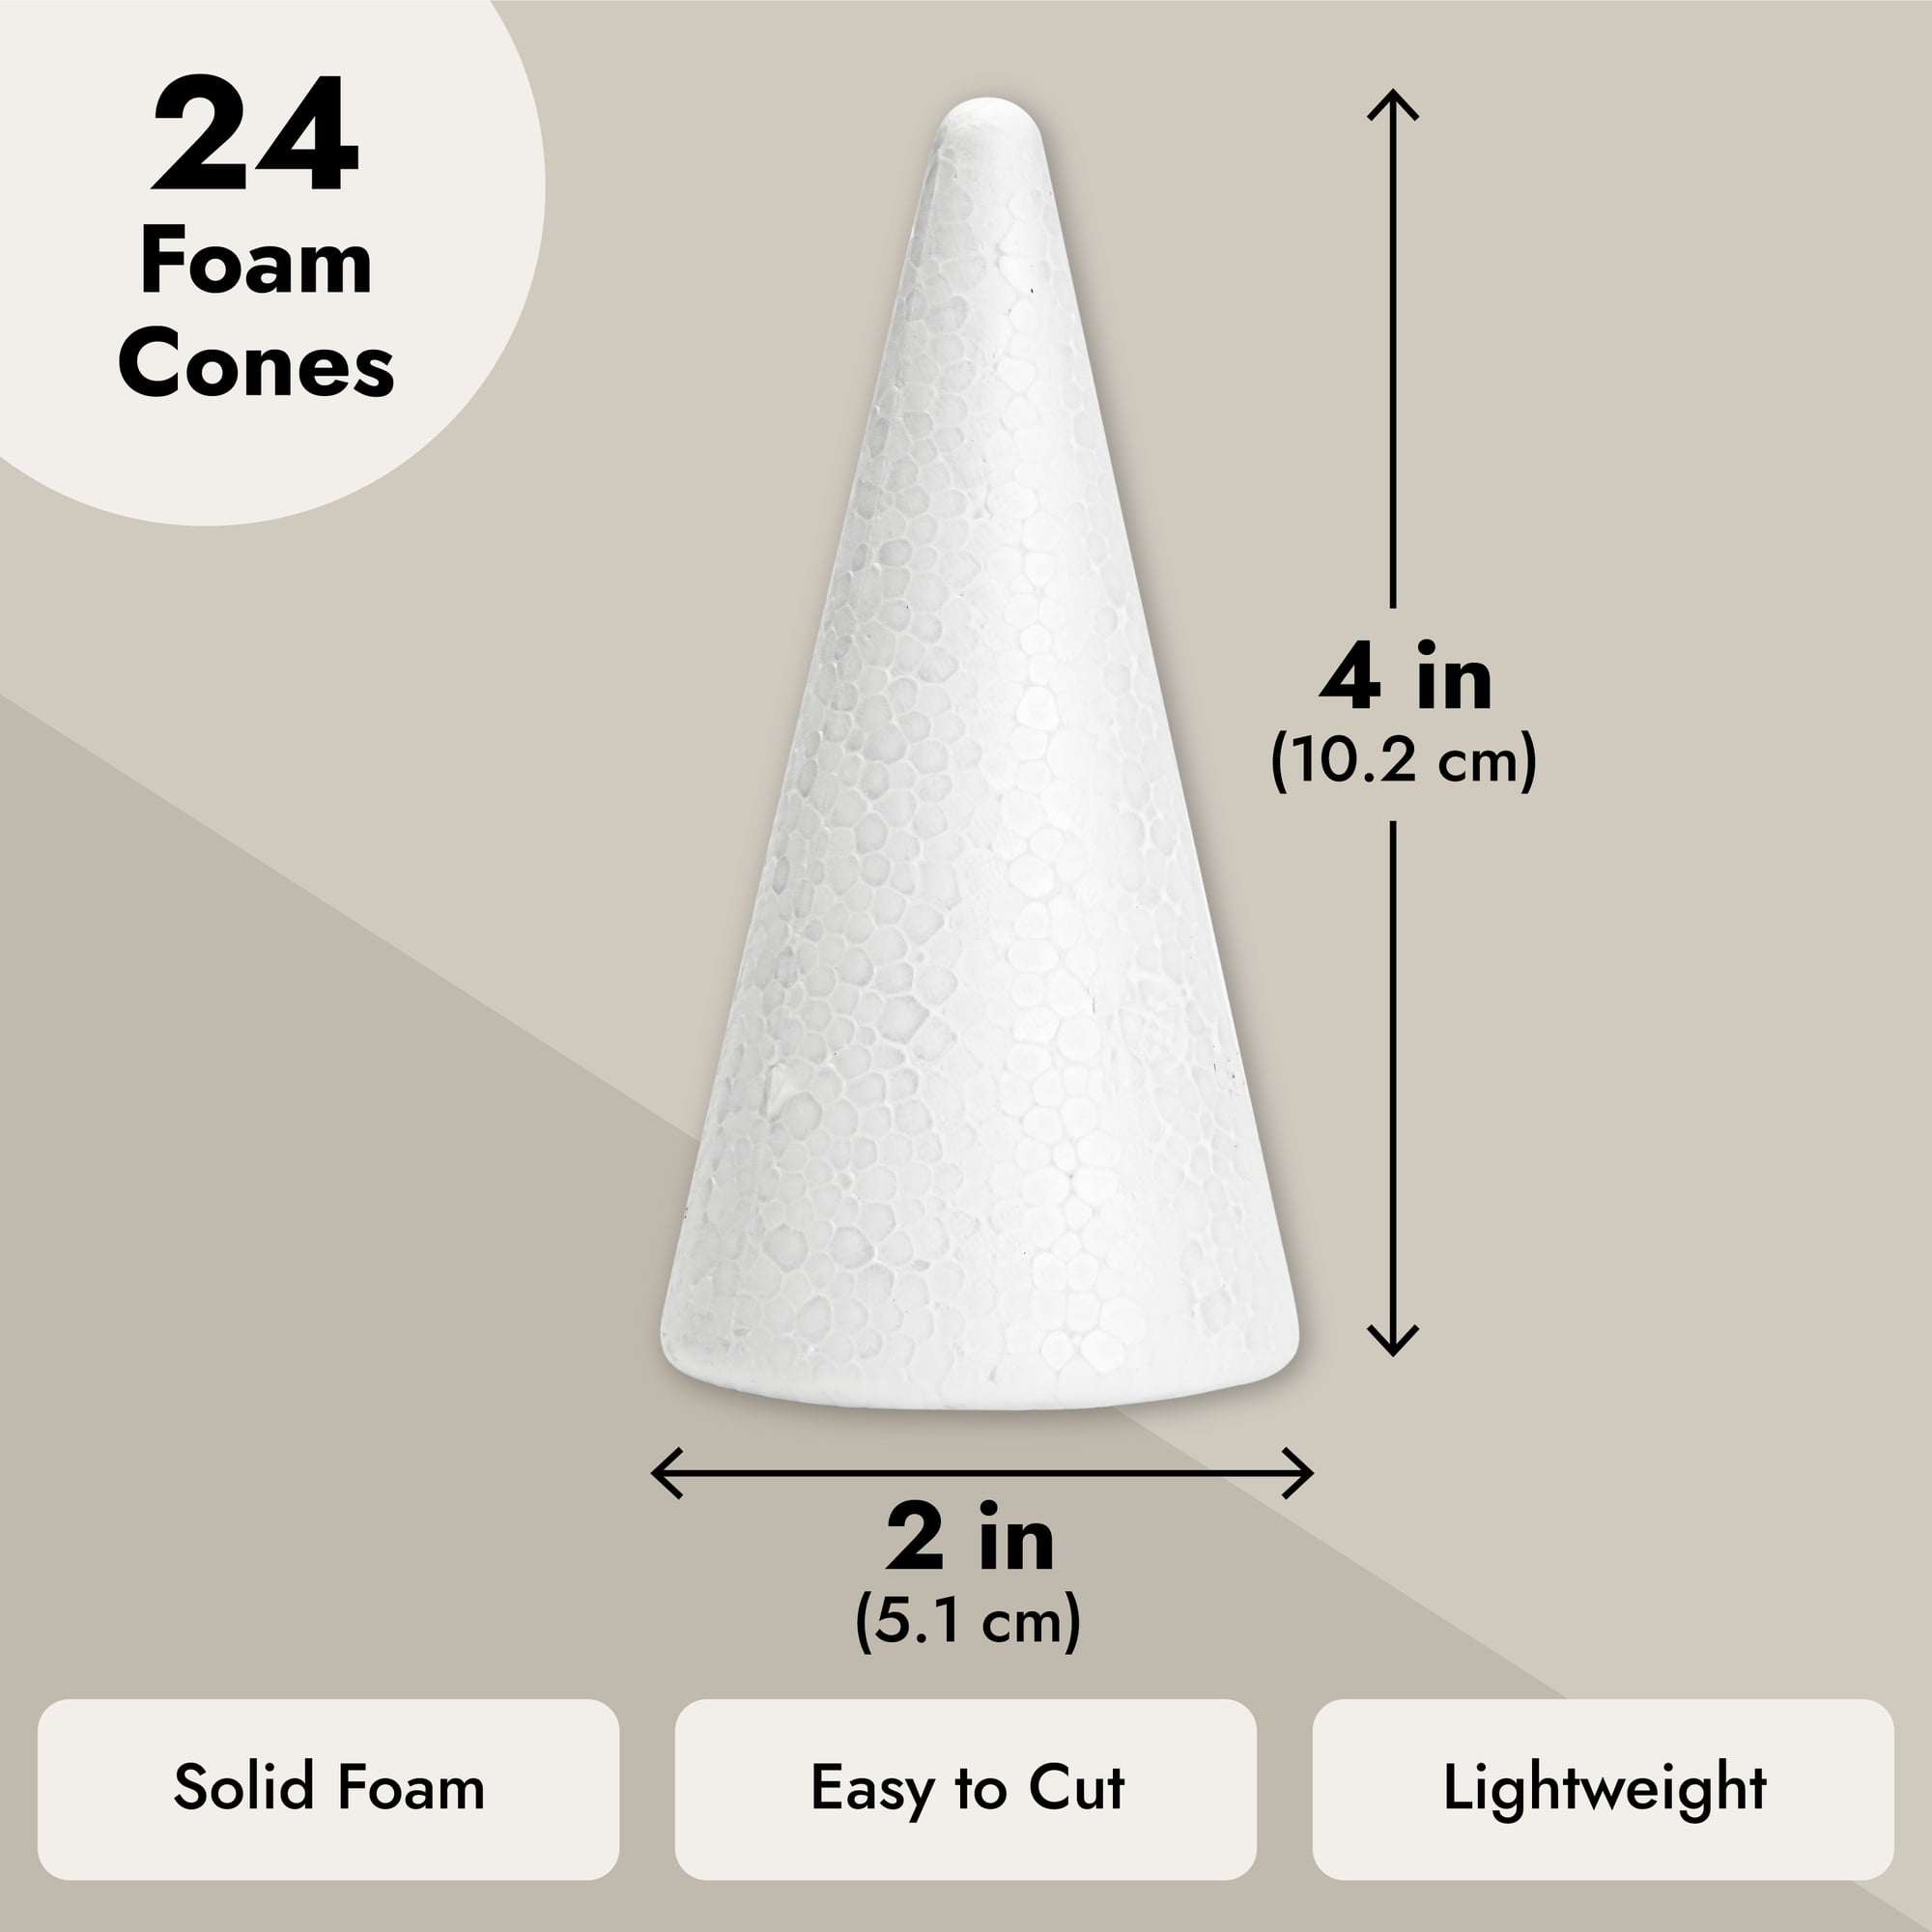 Cone Shaped Styrofoam Foam Ornaments For Handmade DIY Coffee Filter Crafts  And Christmas Decorations In Kids Kindergarten From Huanlingluo, $8.69